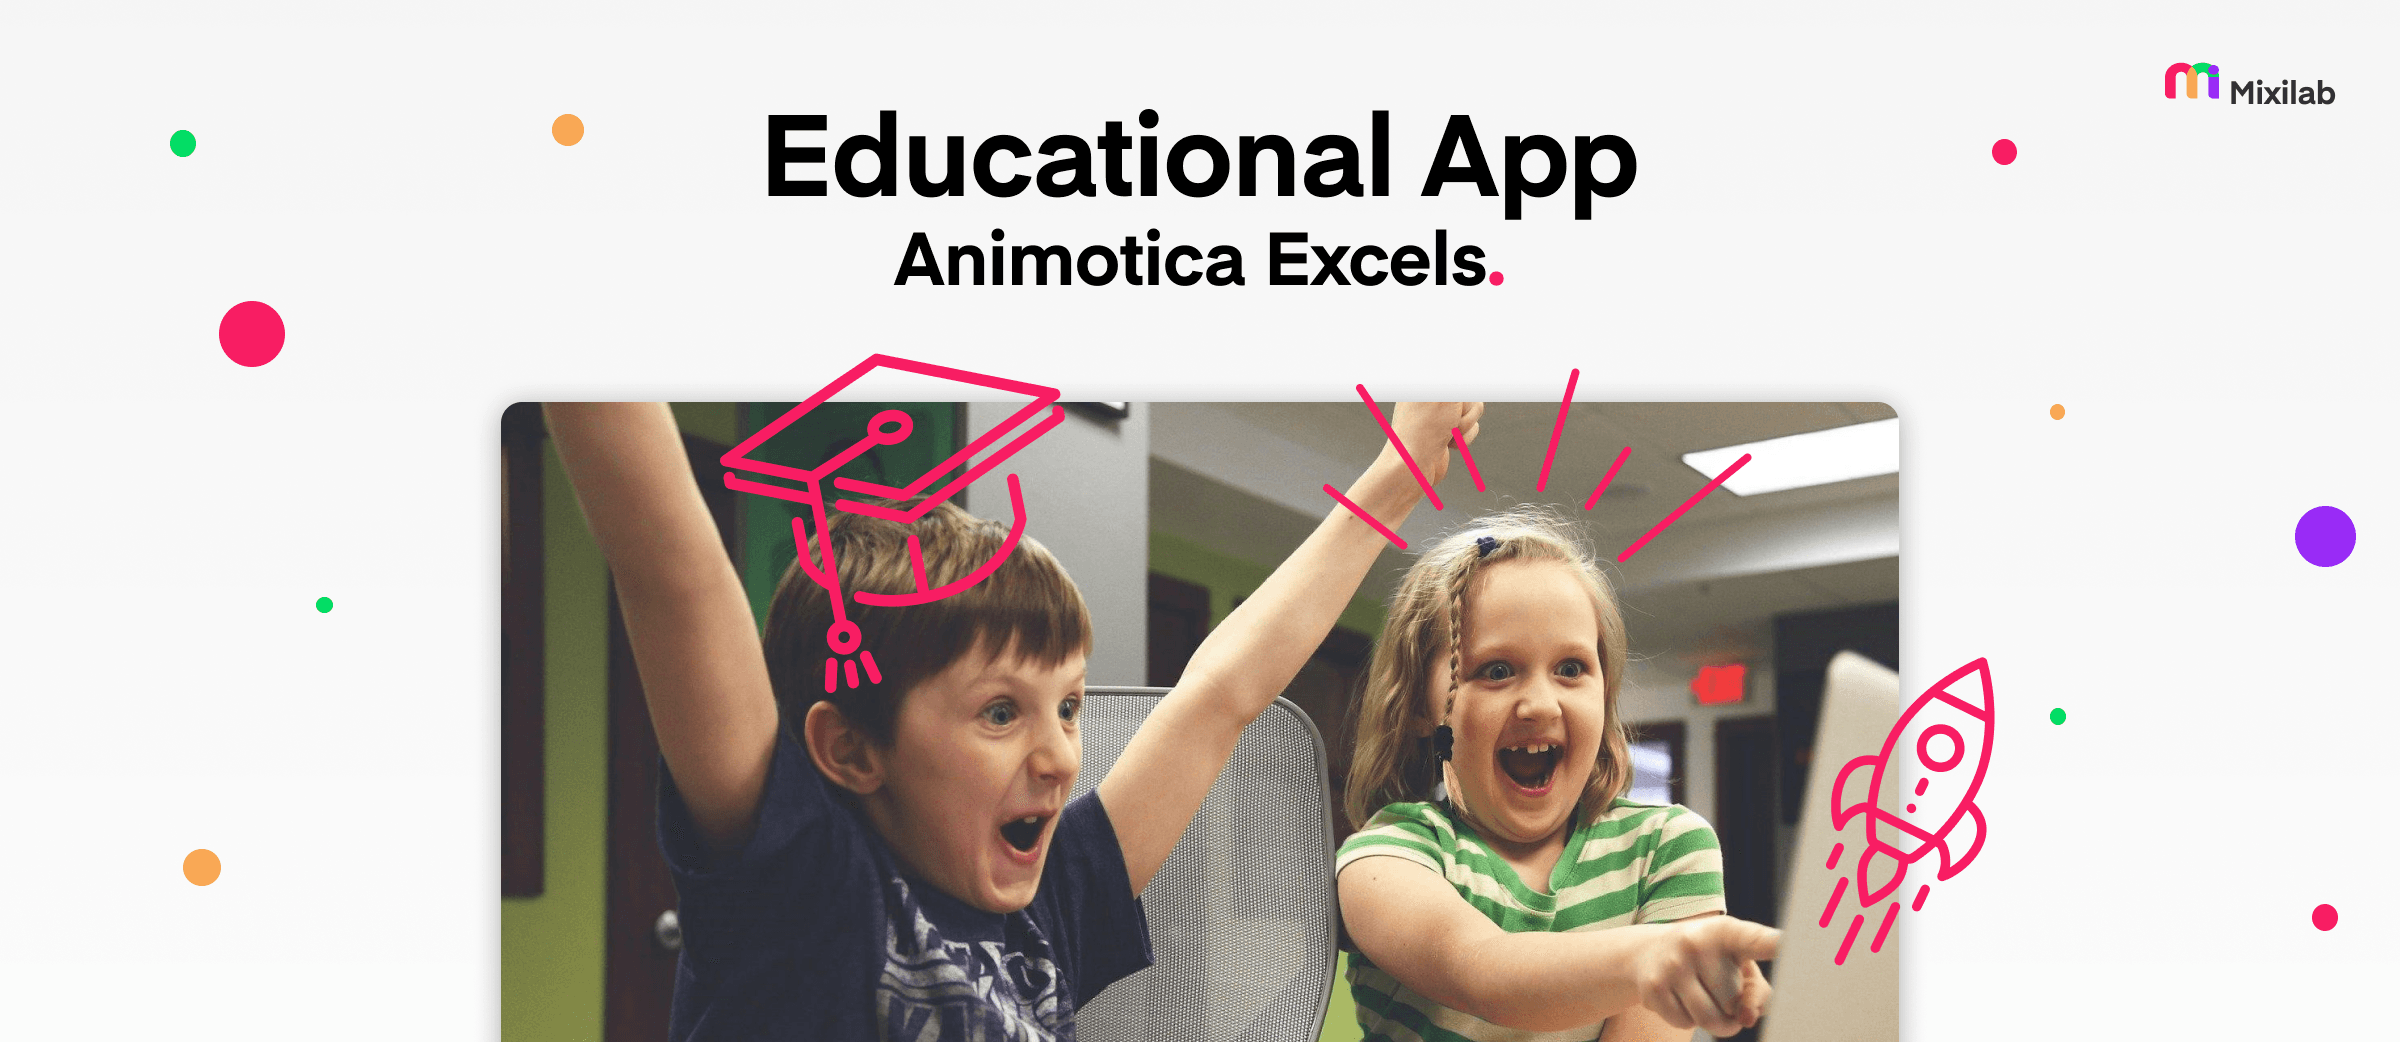 Animotica Excels At The Educational App Score With Pitch-Perfect Reviews